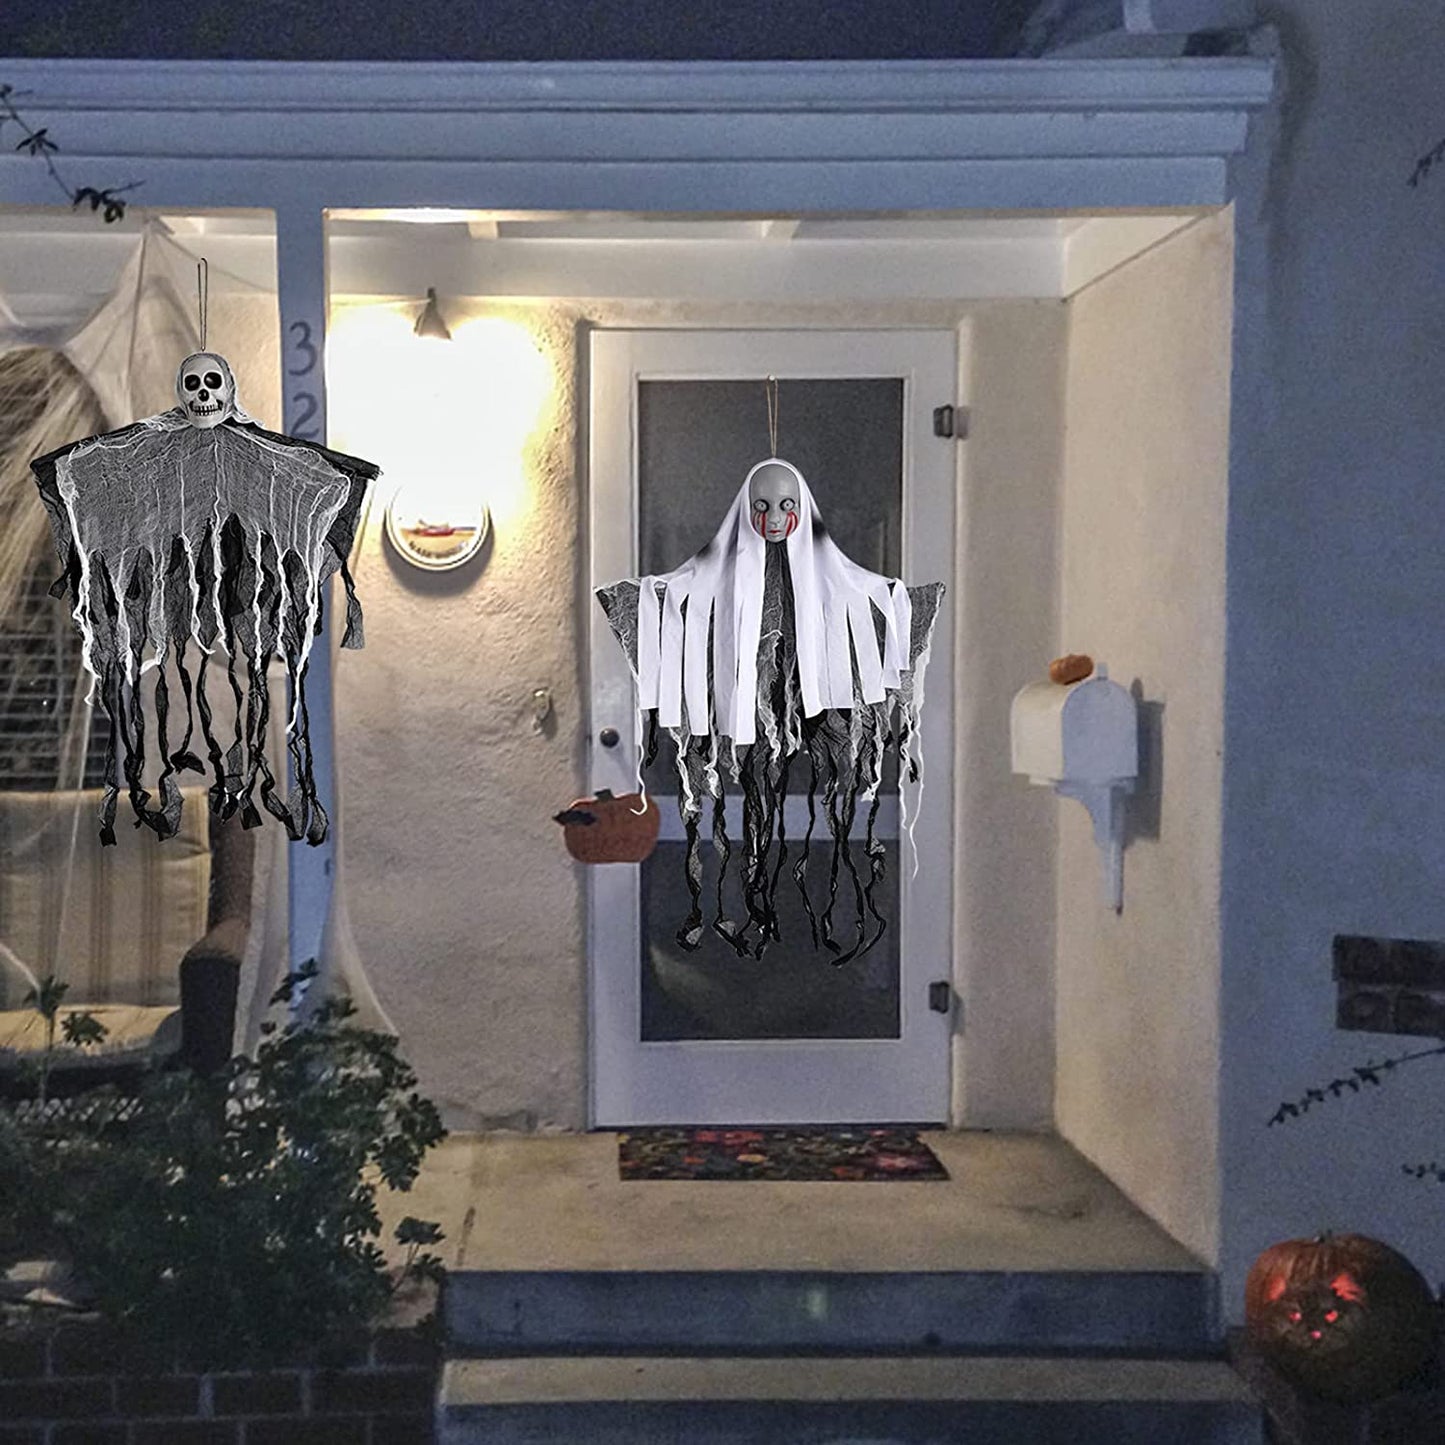 Hanging Halloween Ghosts Decorations 2 Pcs Halloween Hanging Grim Reapers Skeleton Hanging Ghost Props Halloween Skeleton Flying Ghost Props for Halloween Party Haunted House Prop Décor